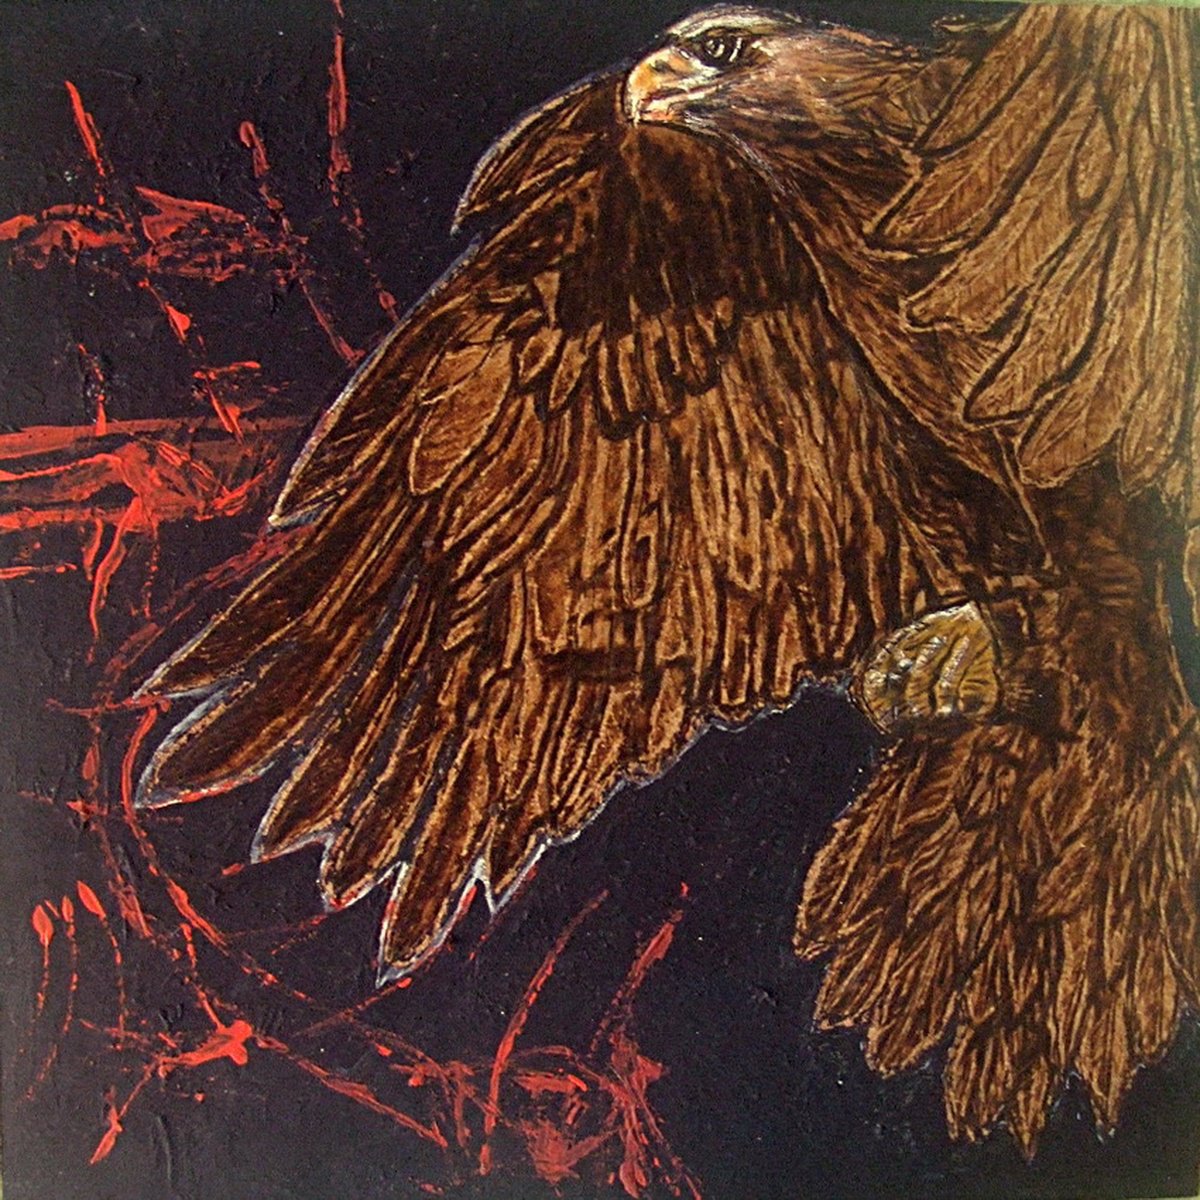 Eagle Vision by MILIS Pyrography